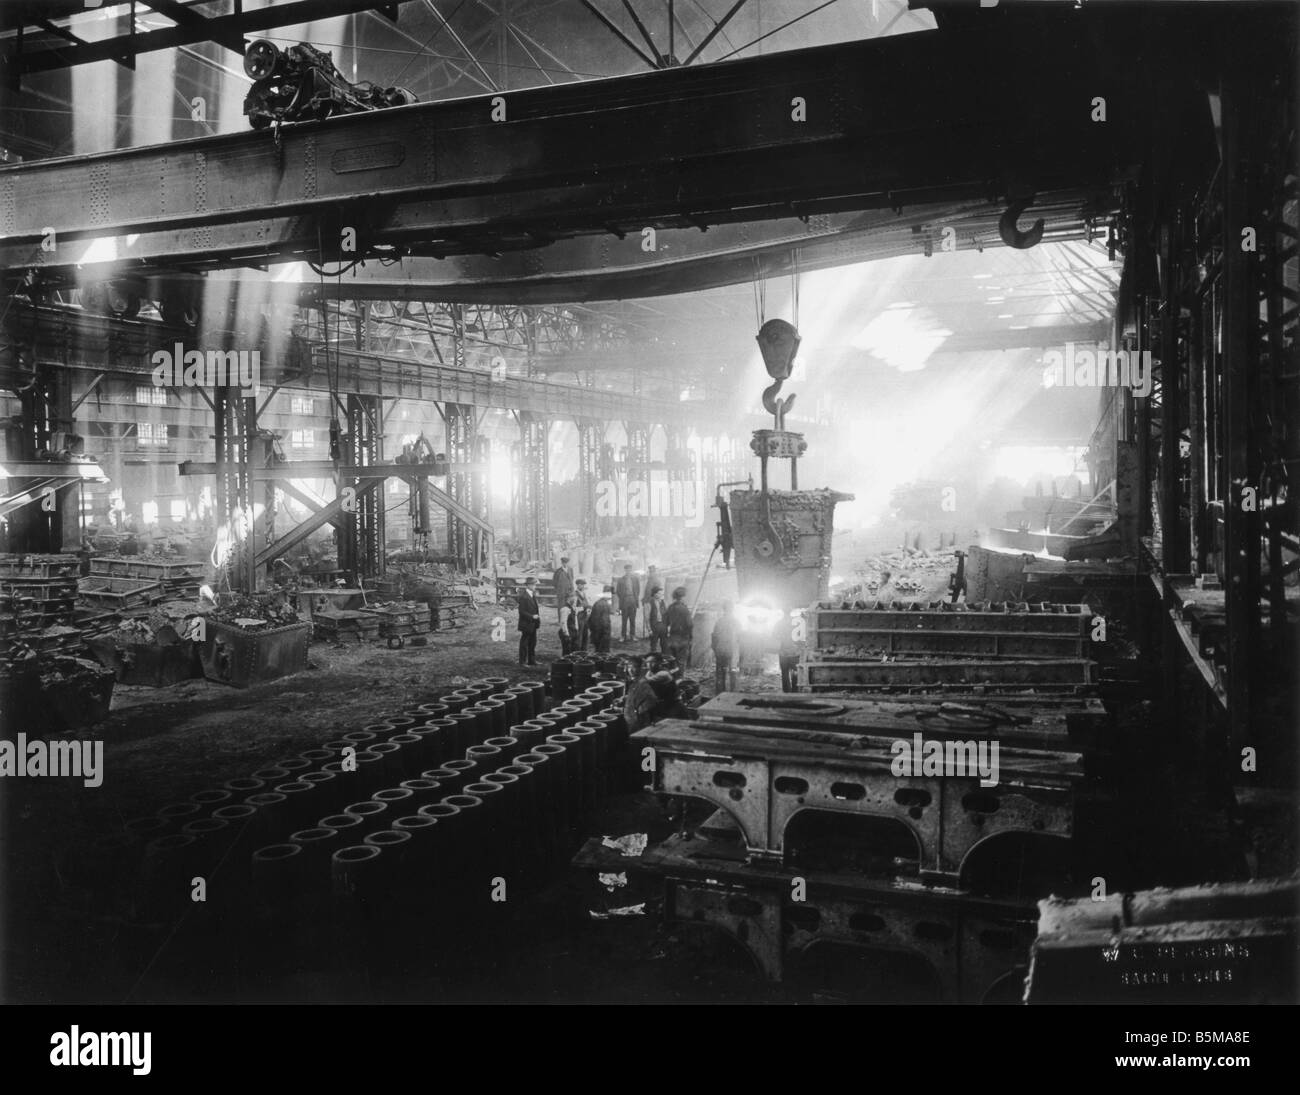 2 G55 R1 1918 1 E US steelworks World War I 1918 History World War I Arms industry Steel casting for the arms industry in the 1s Stock Photo